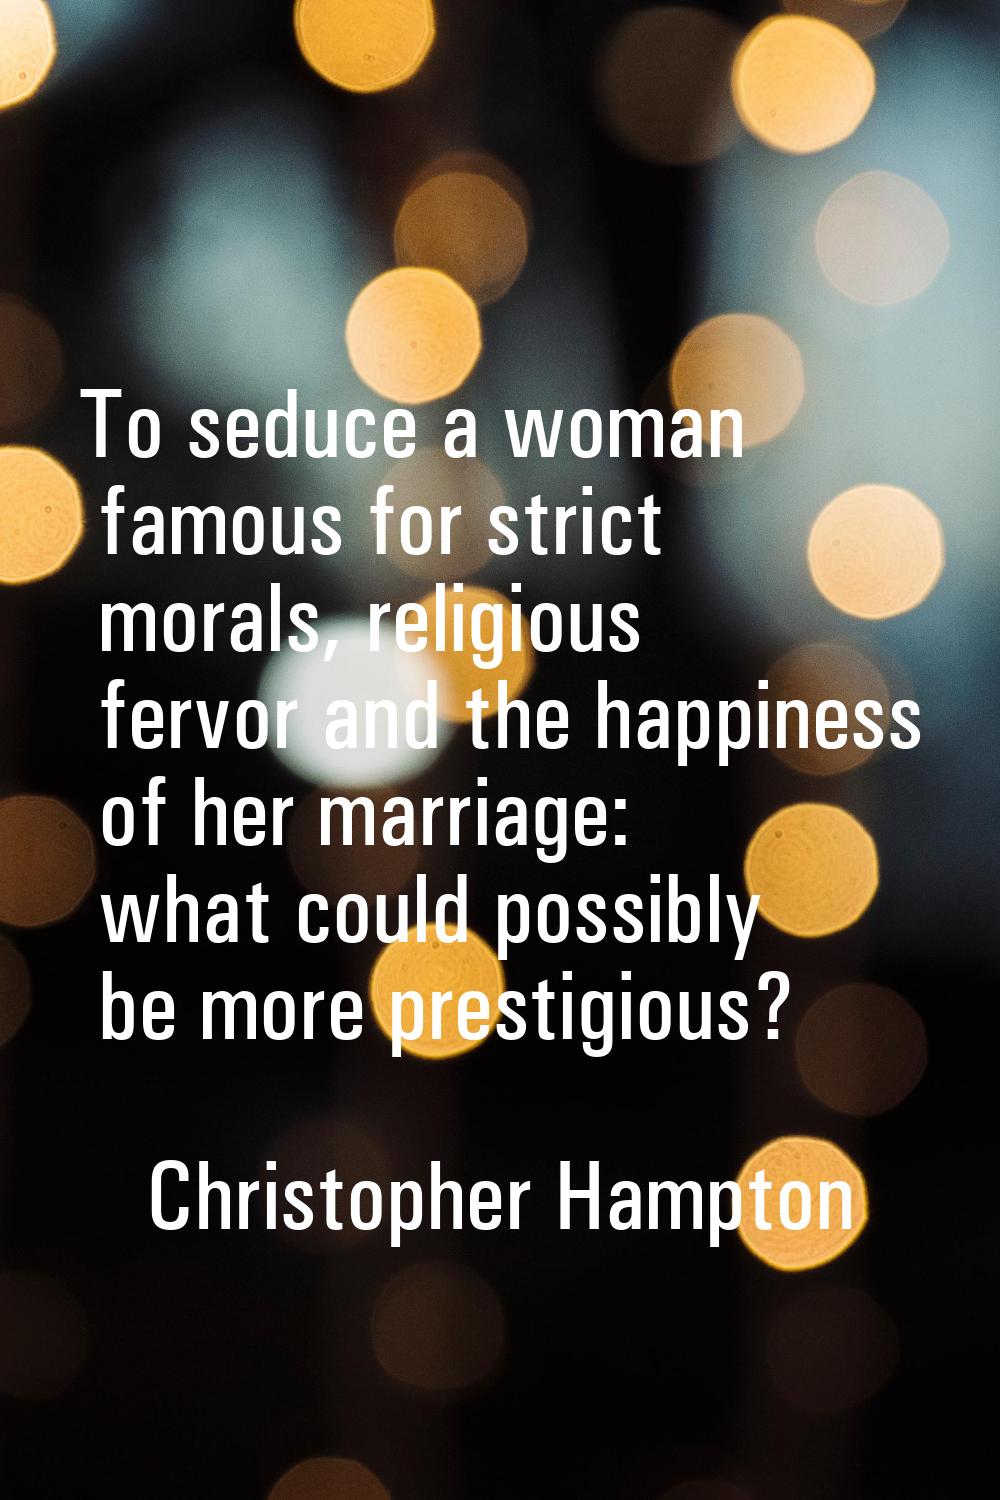 To seduce a woman famous for strict morals, religious fervor and the happiness of her marriage: wha